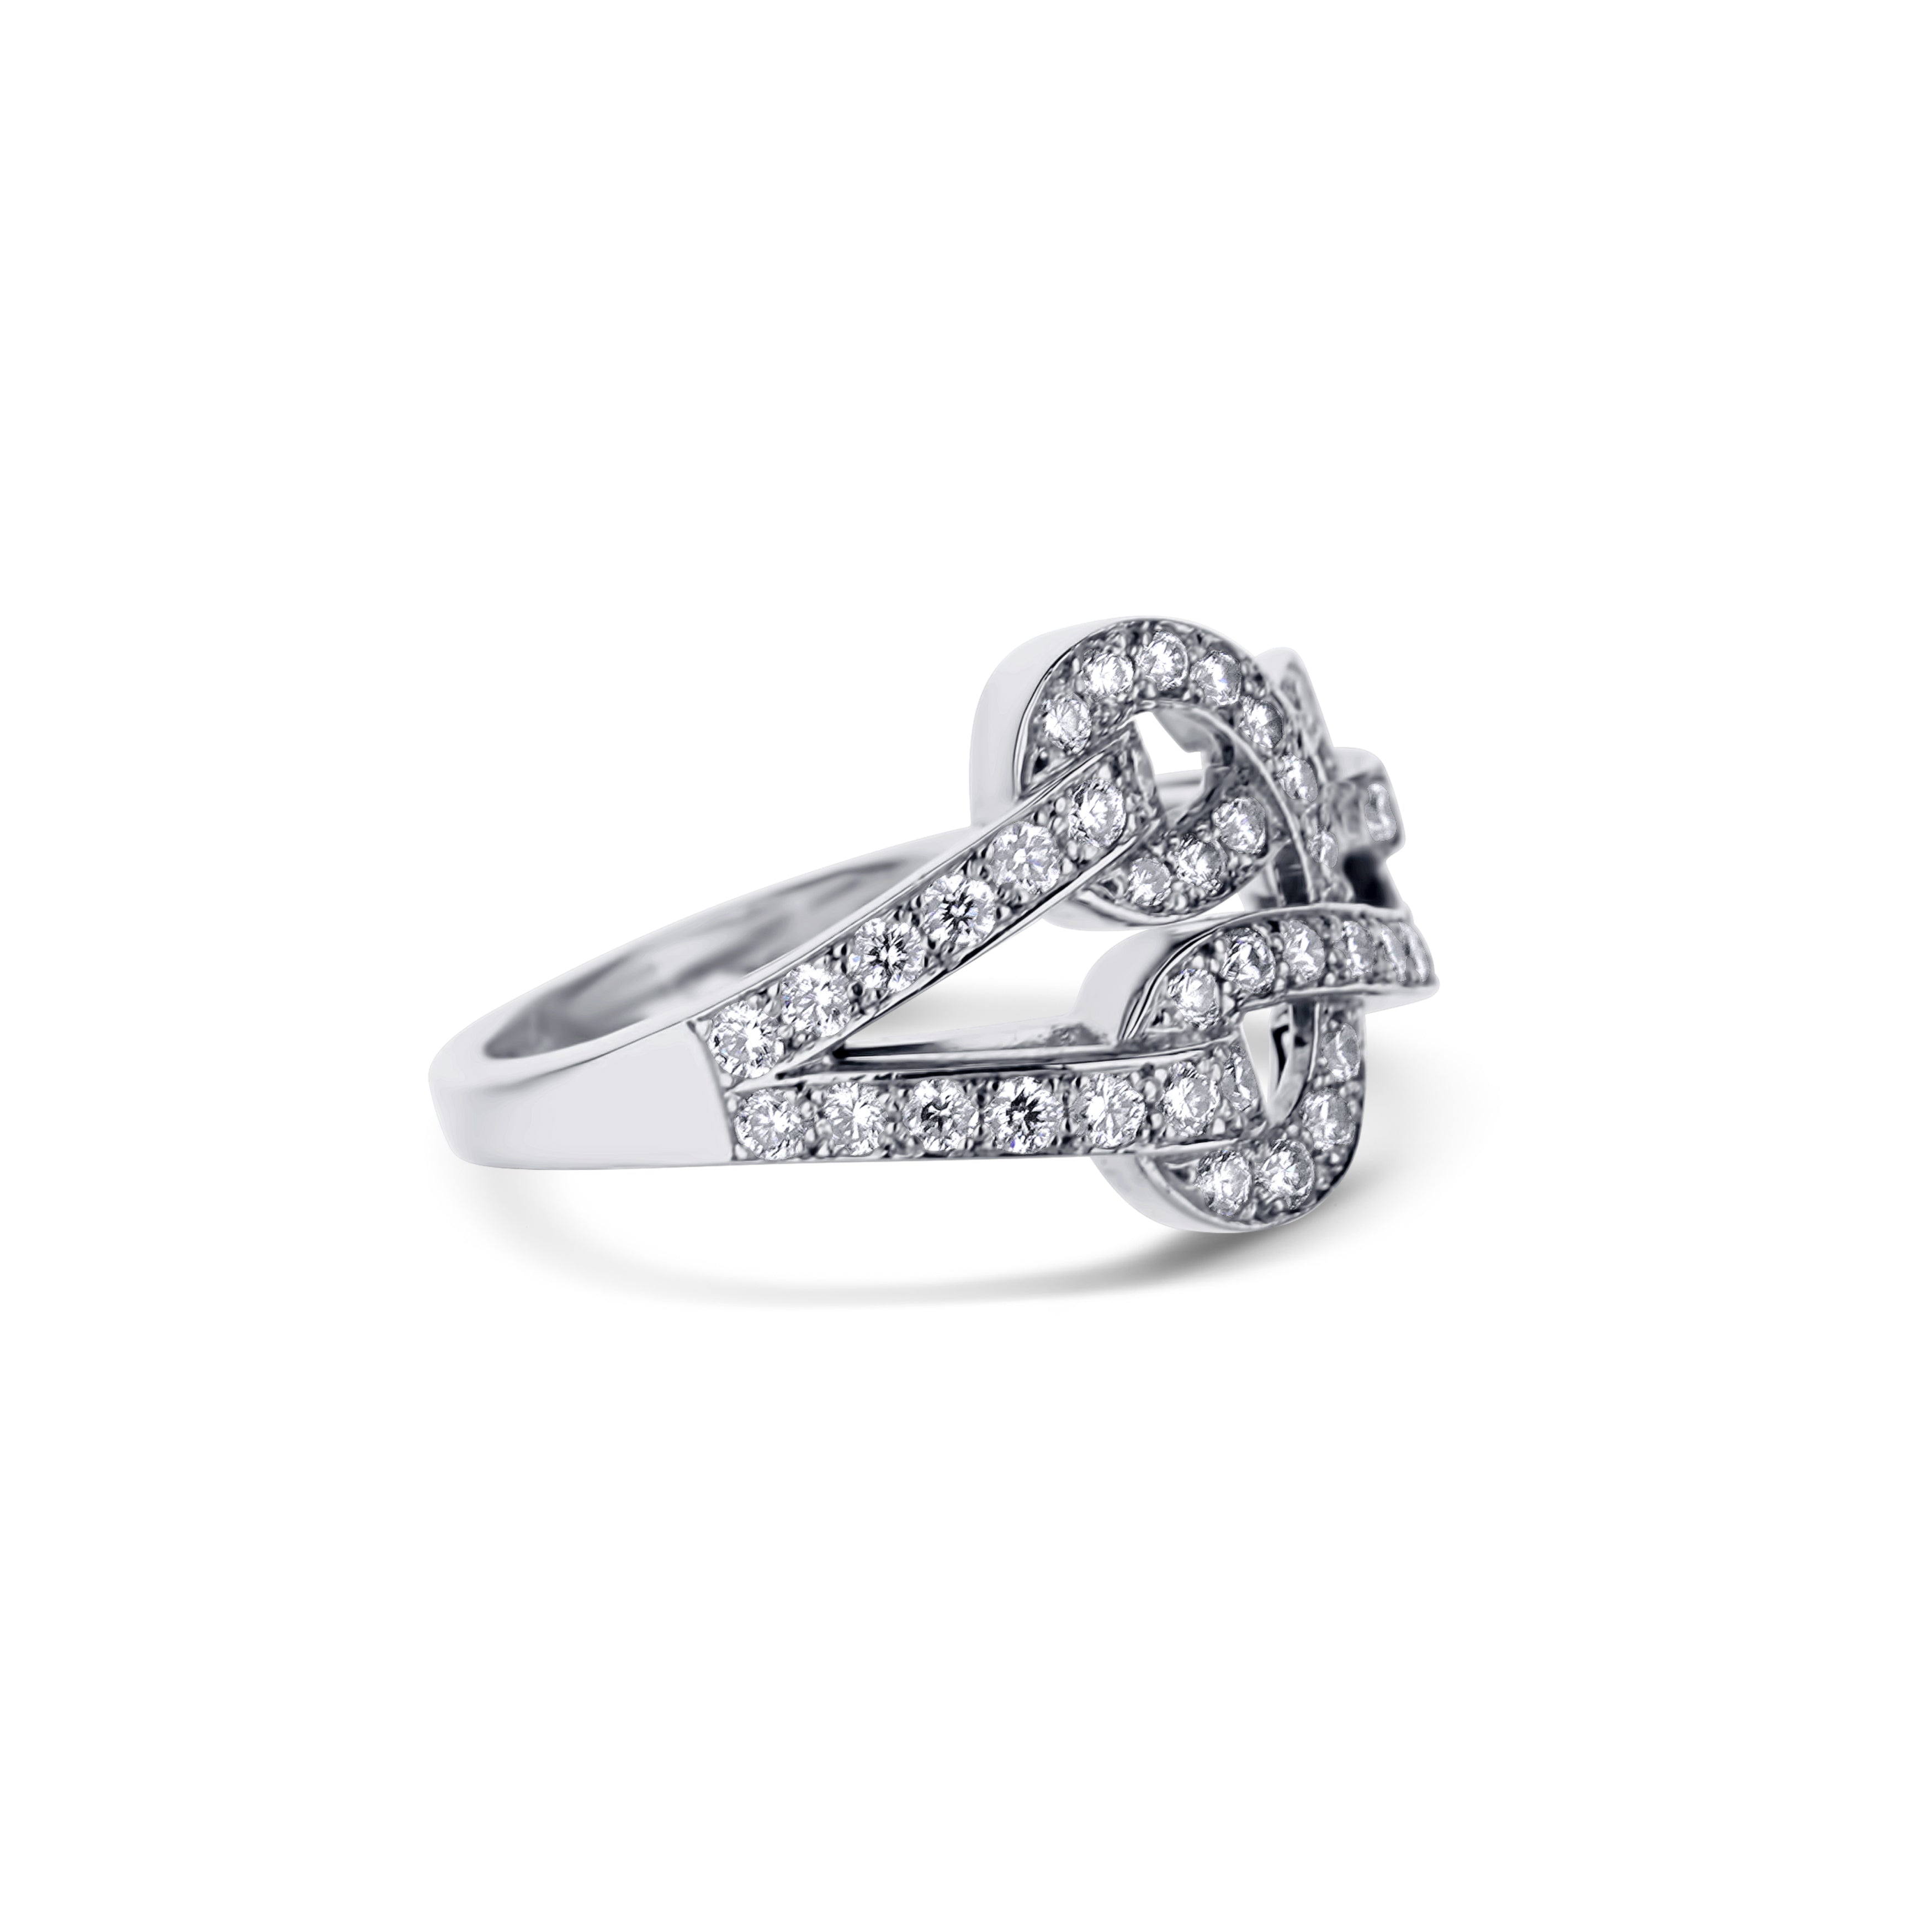 18K White Gold "Cartier" Style Love Knot Ring